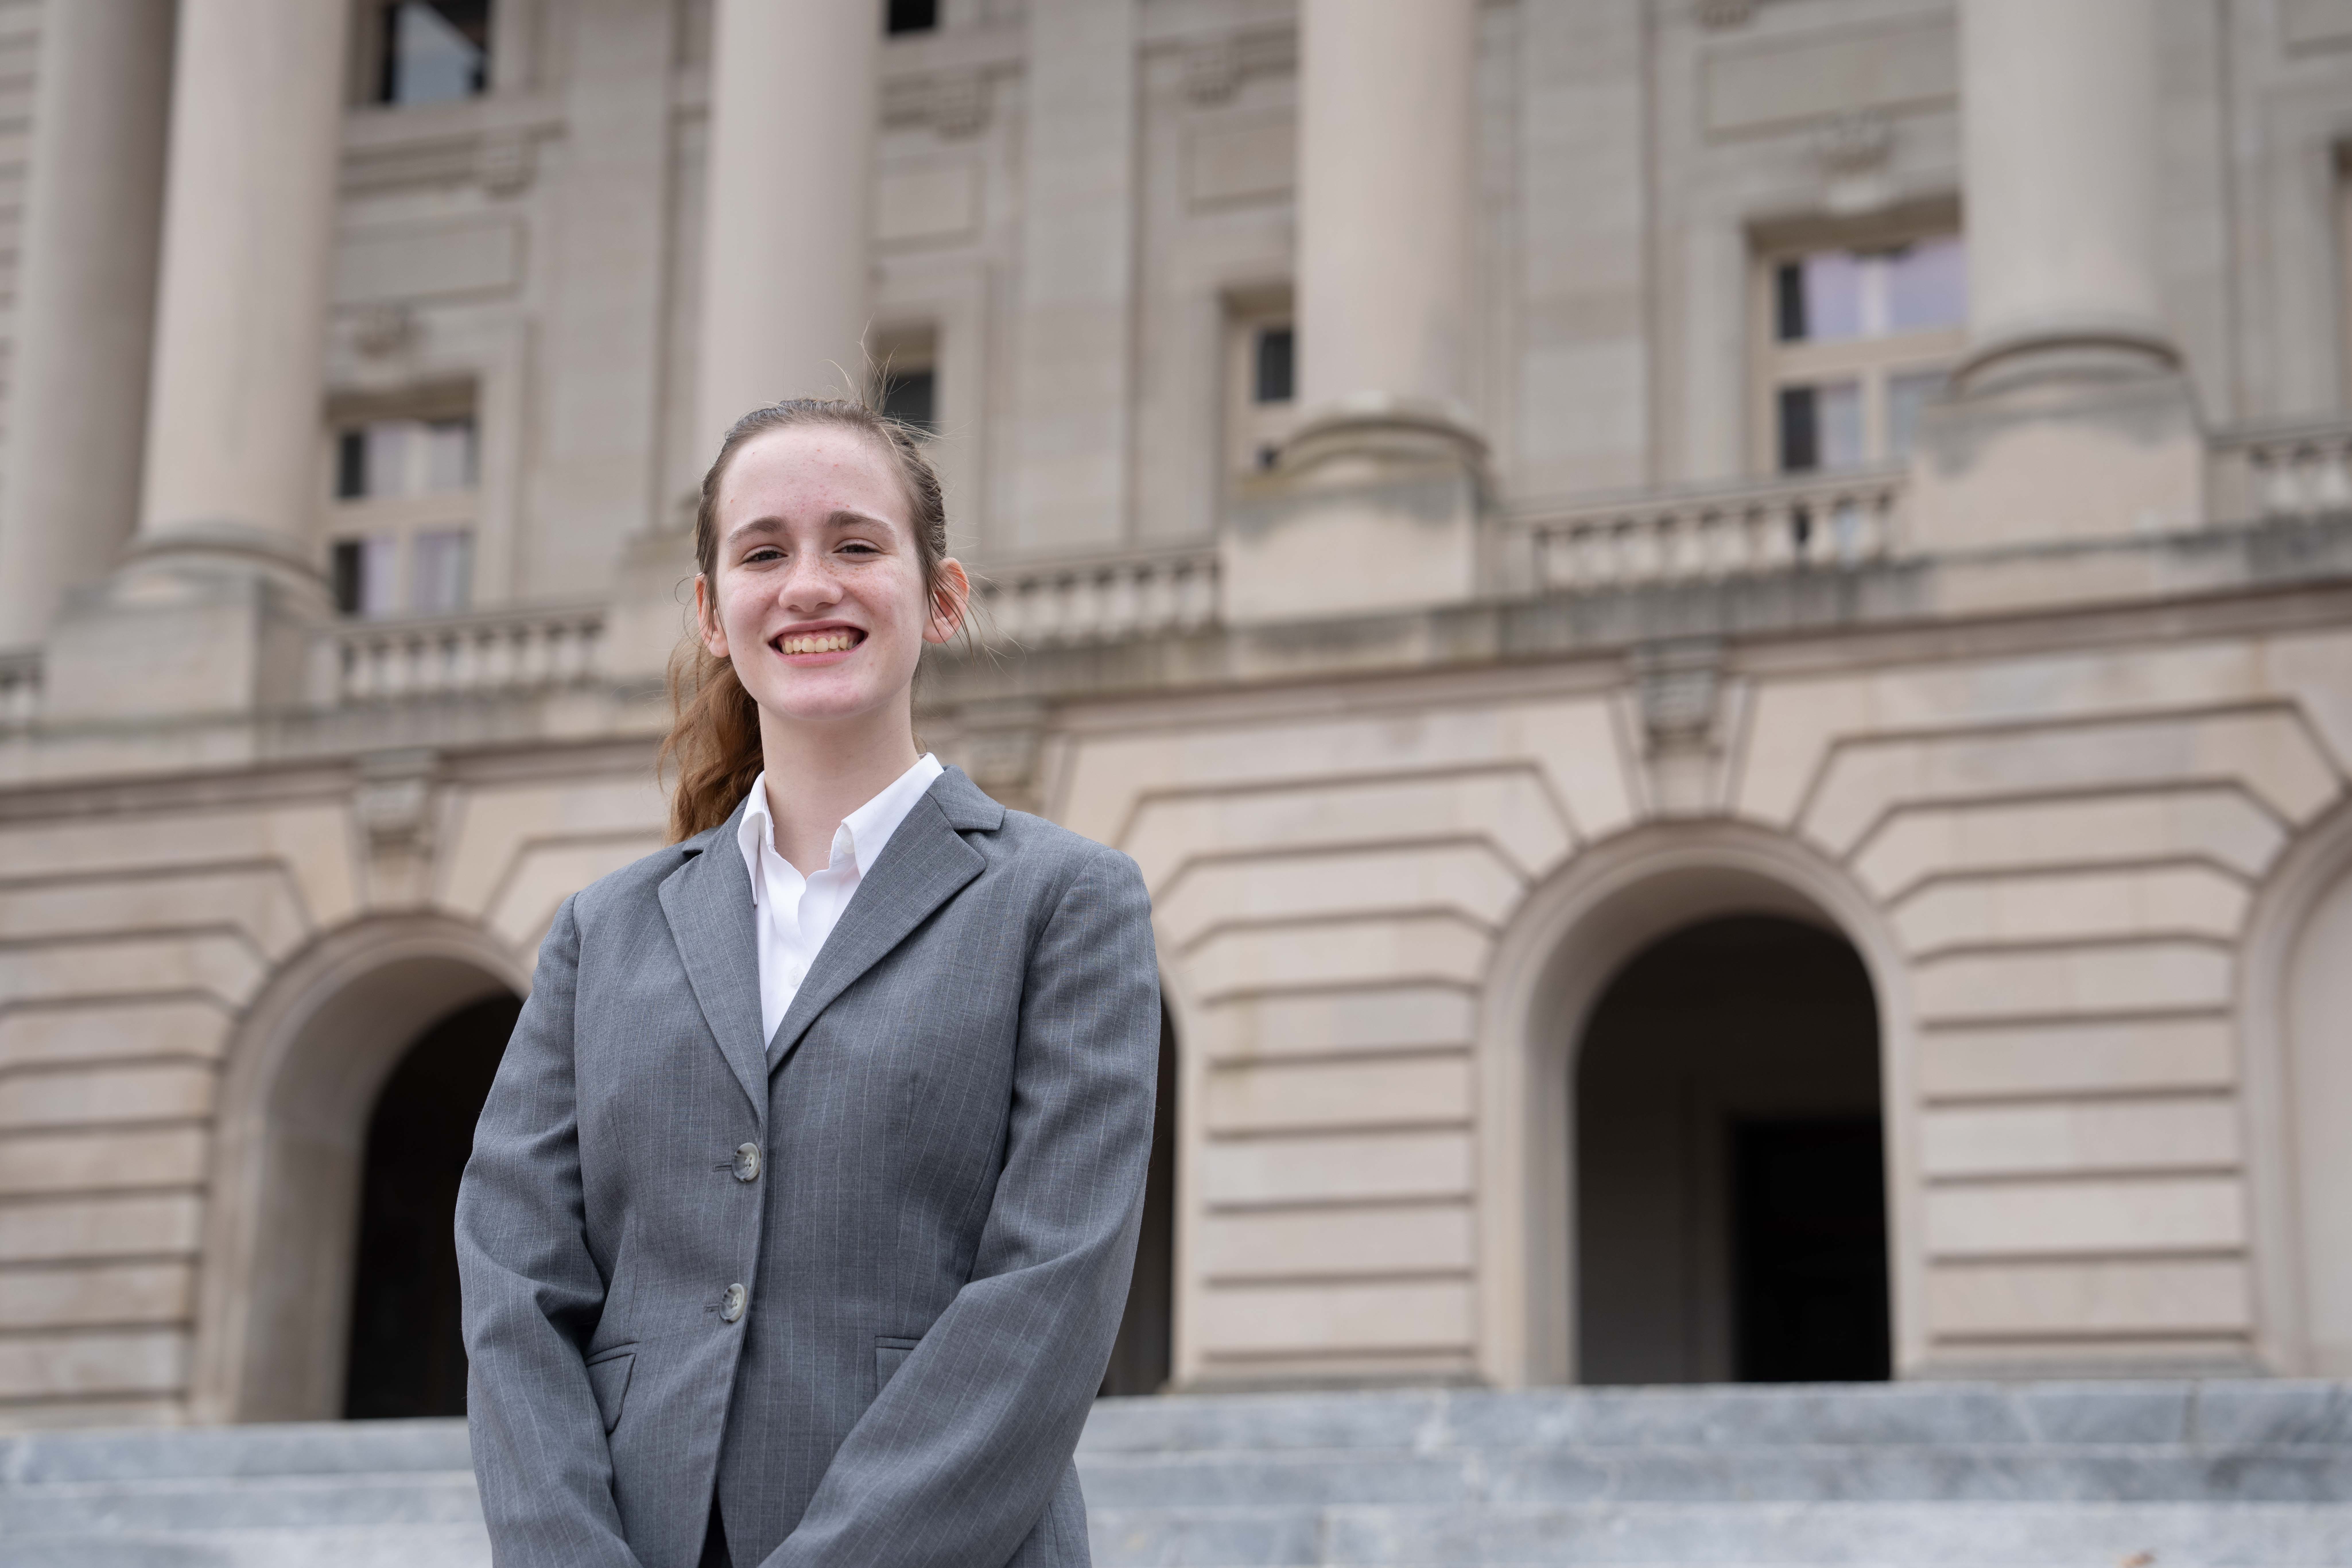 This Oldham County teen may be Kentucky's youngest lobbyist